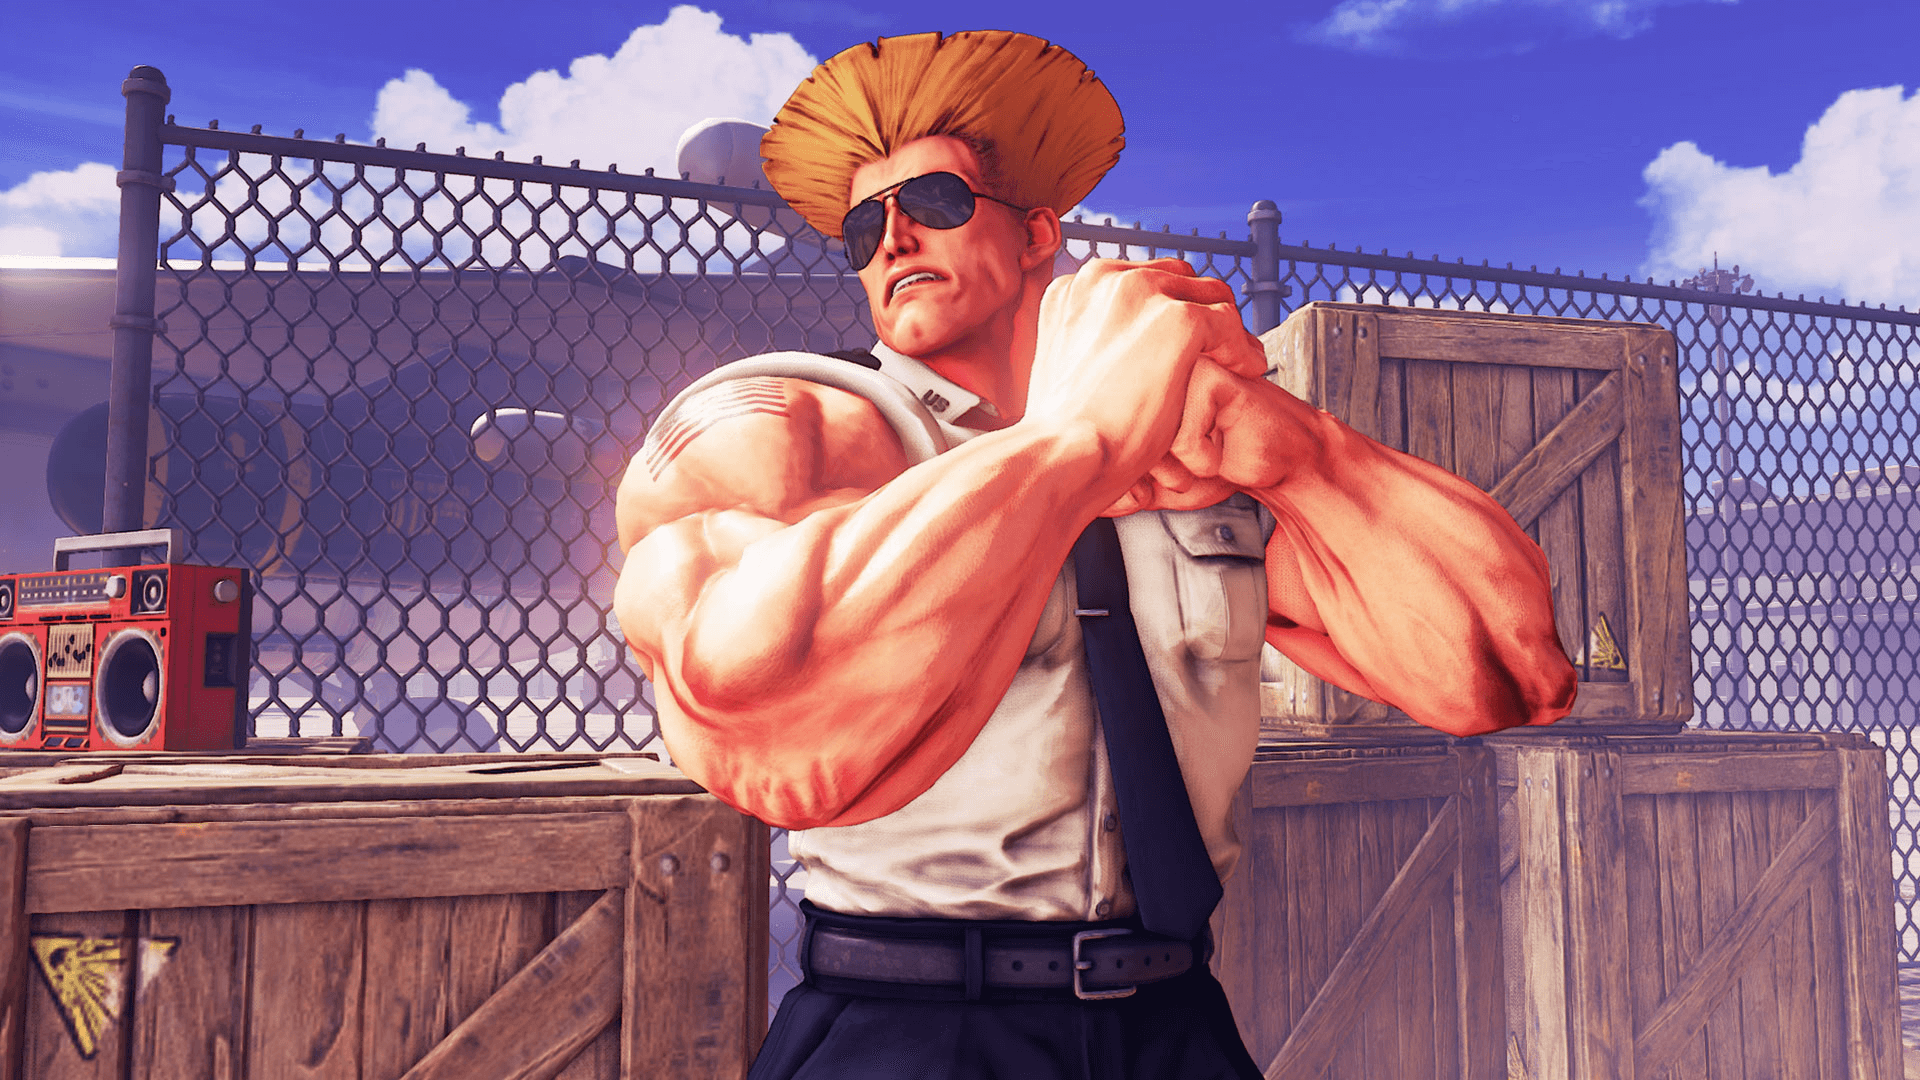 Guile's iconic sweep seen from the opponent's perspective in